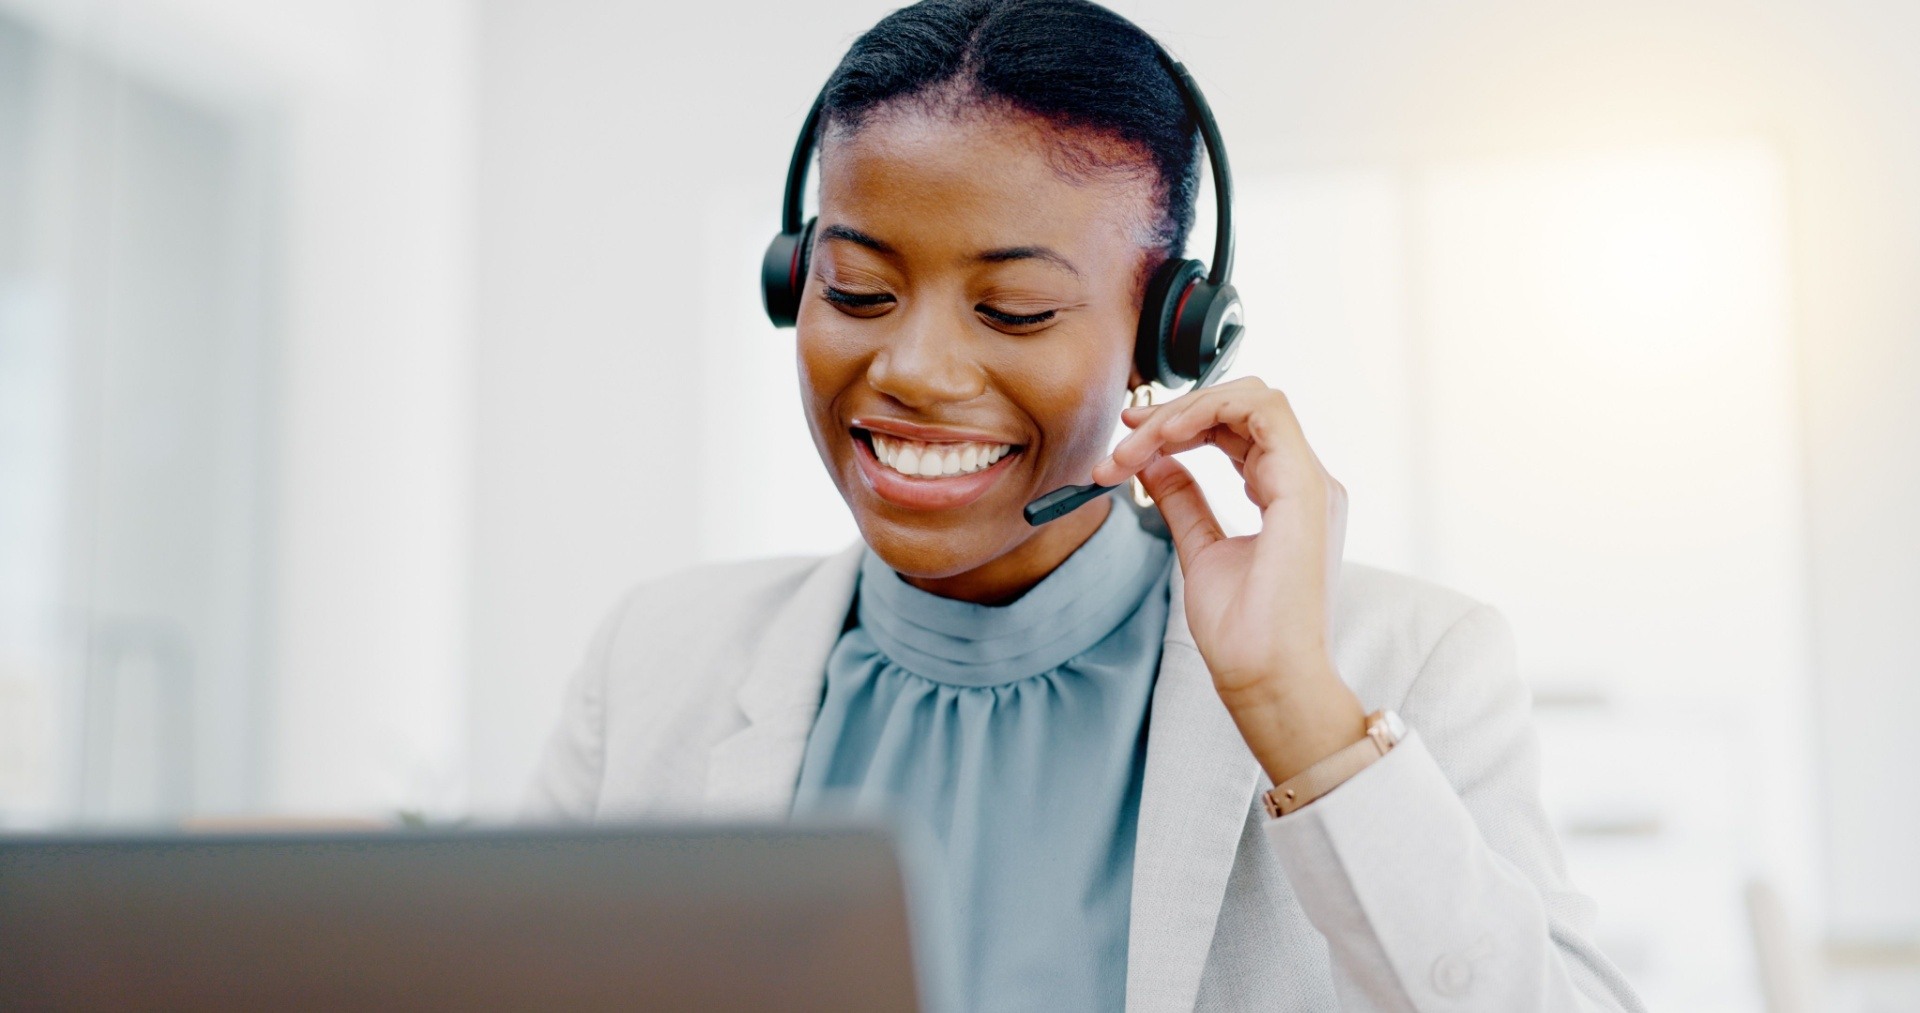 woman answering the phone at a call center. Smiling and looking friendly 